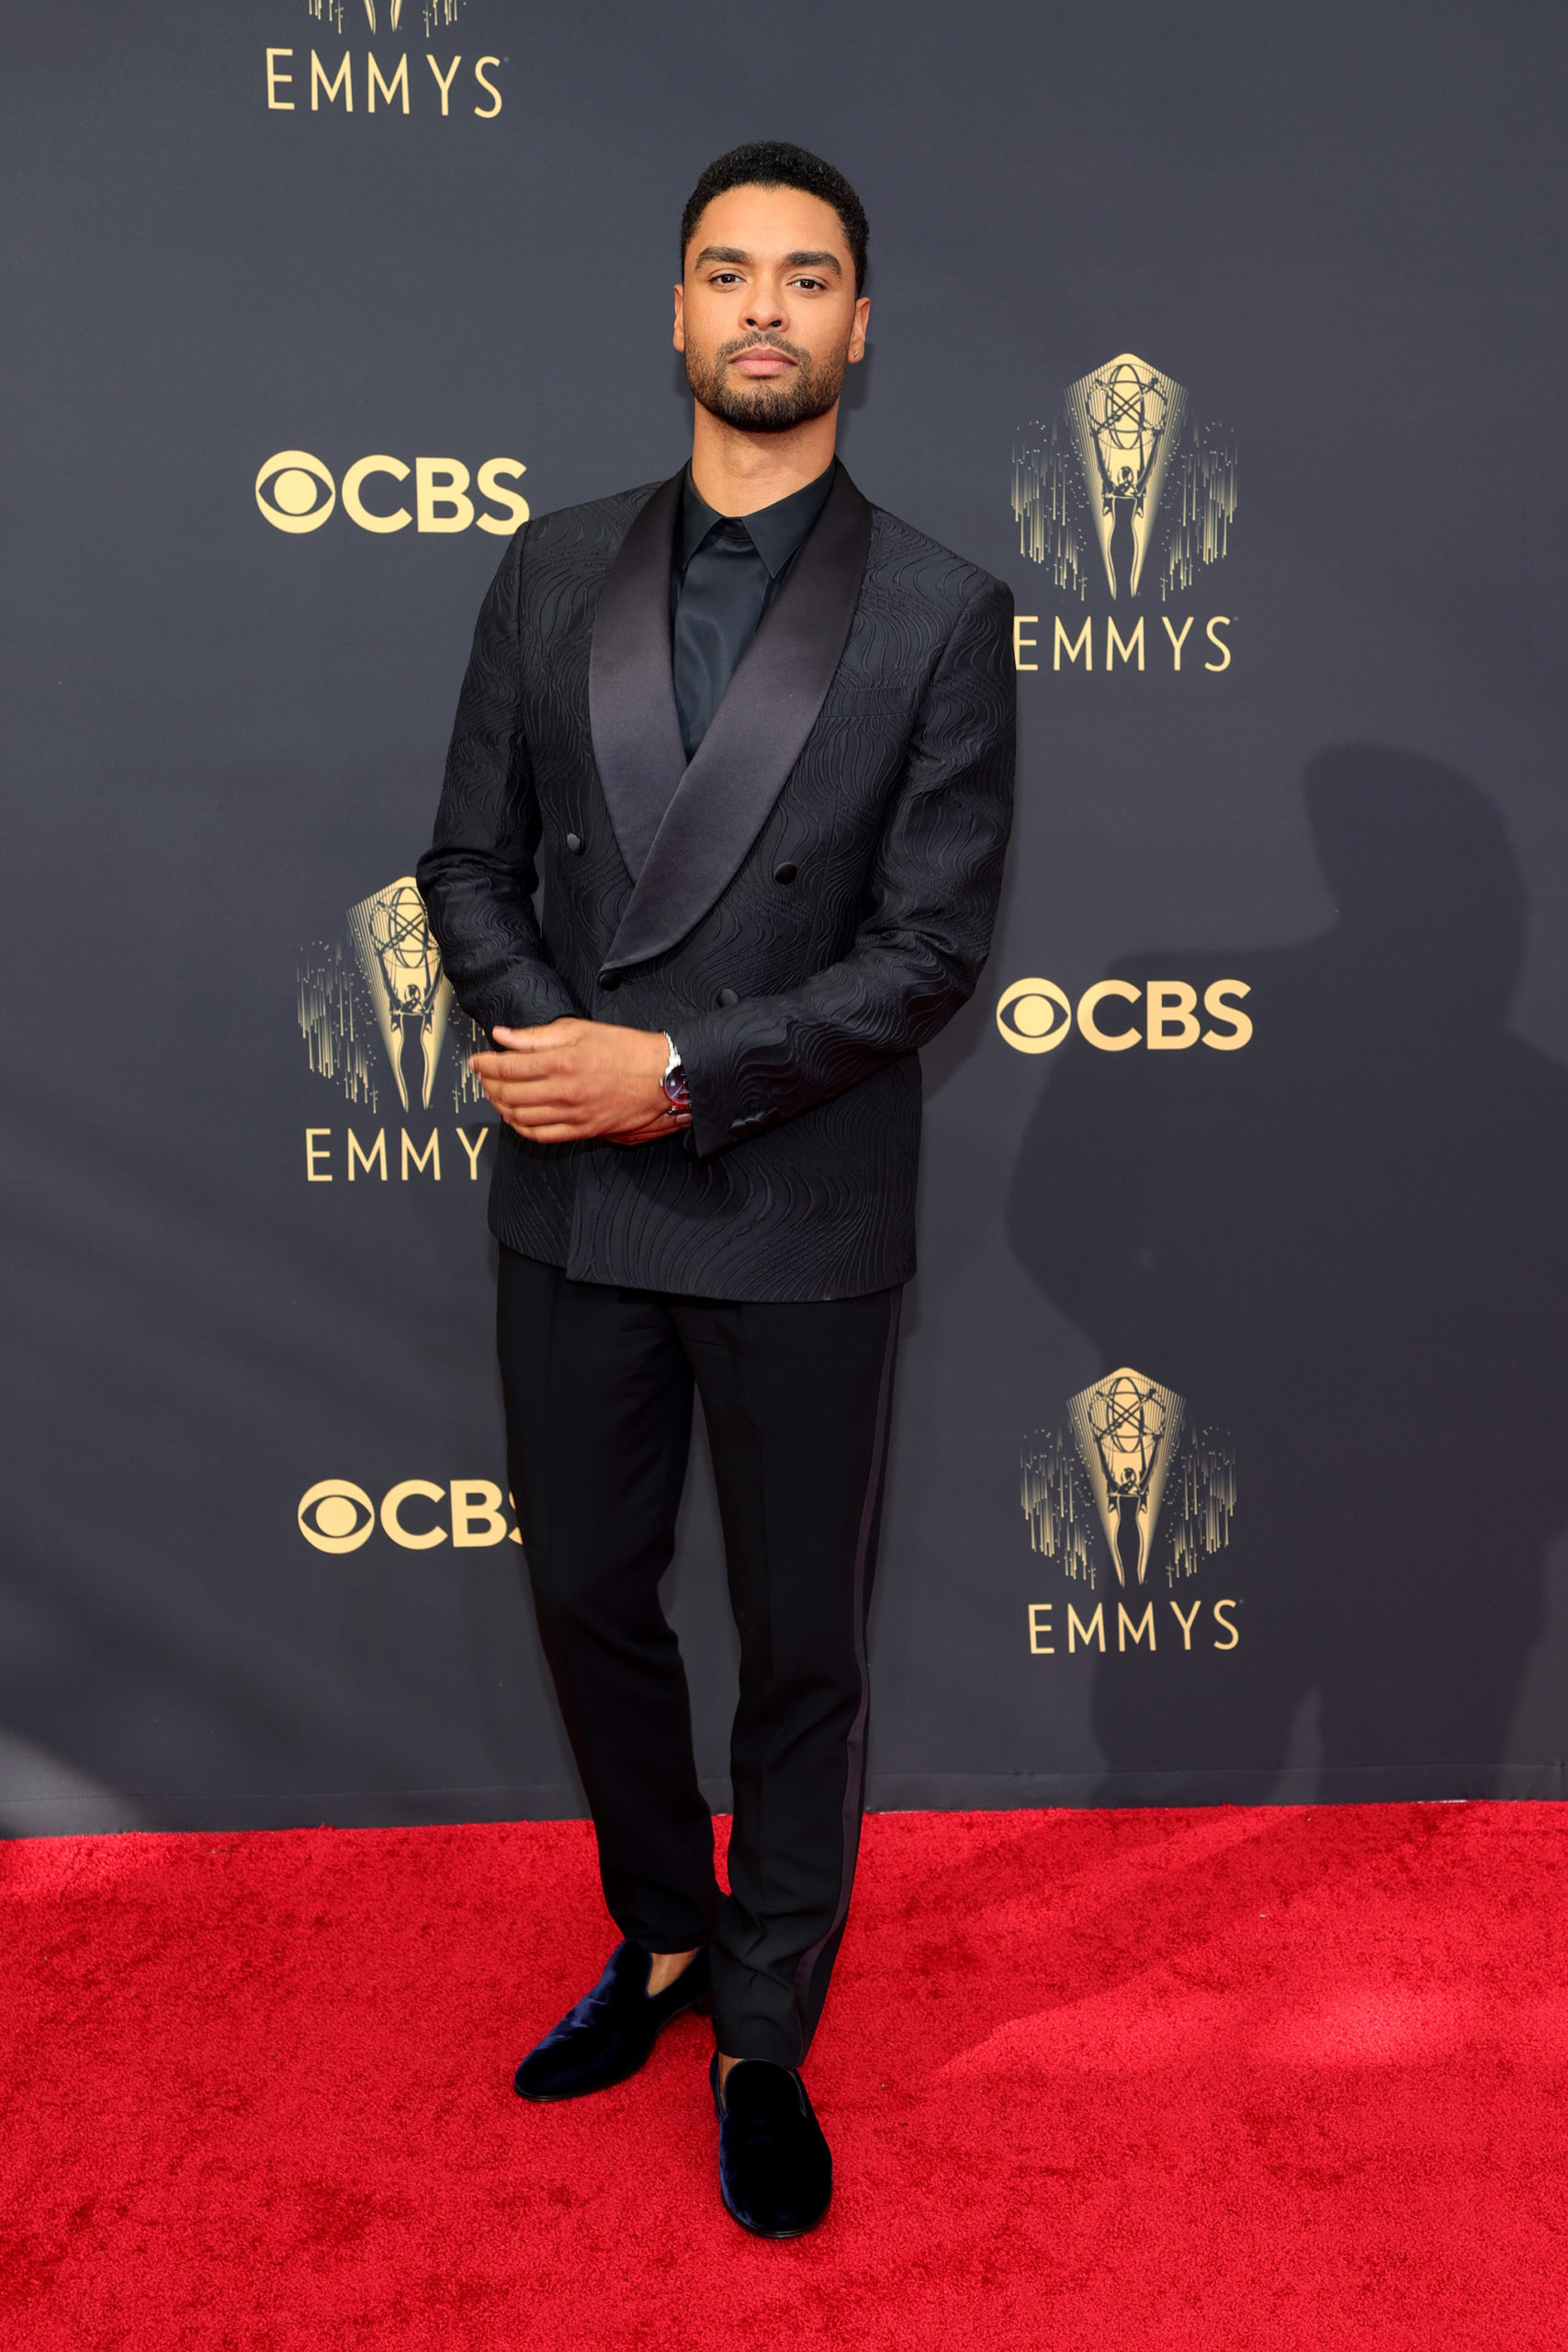 Regé-Jean Page at the 2021 Emmys